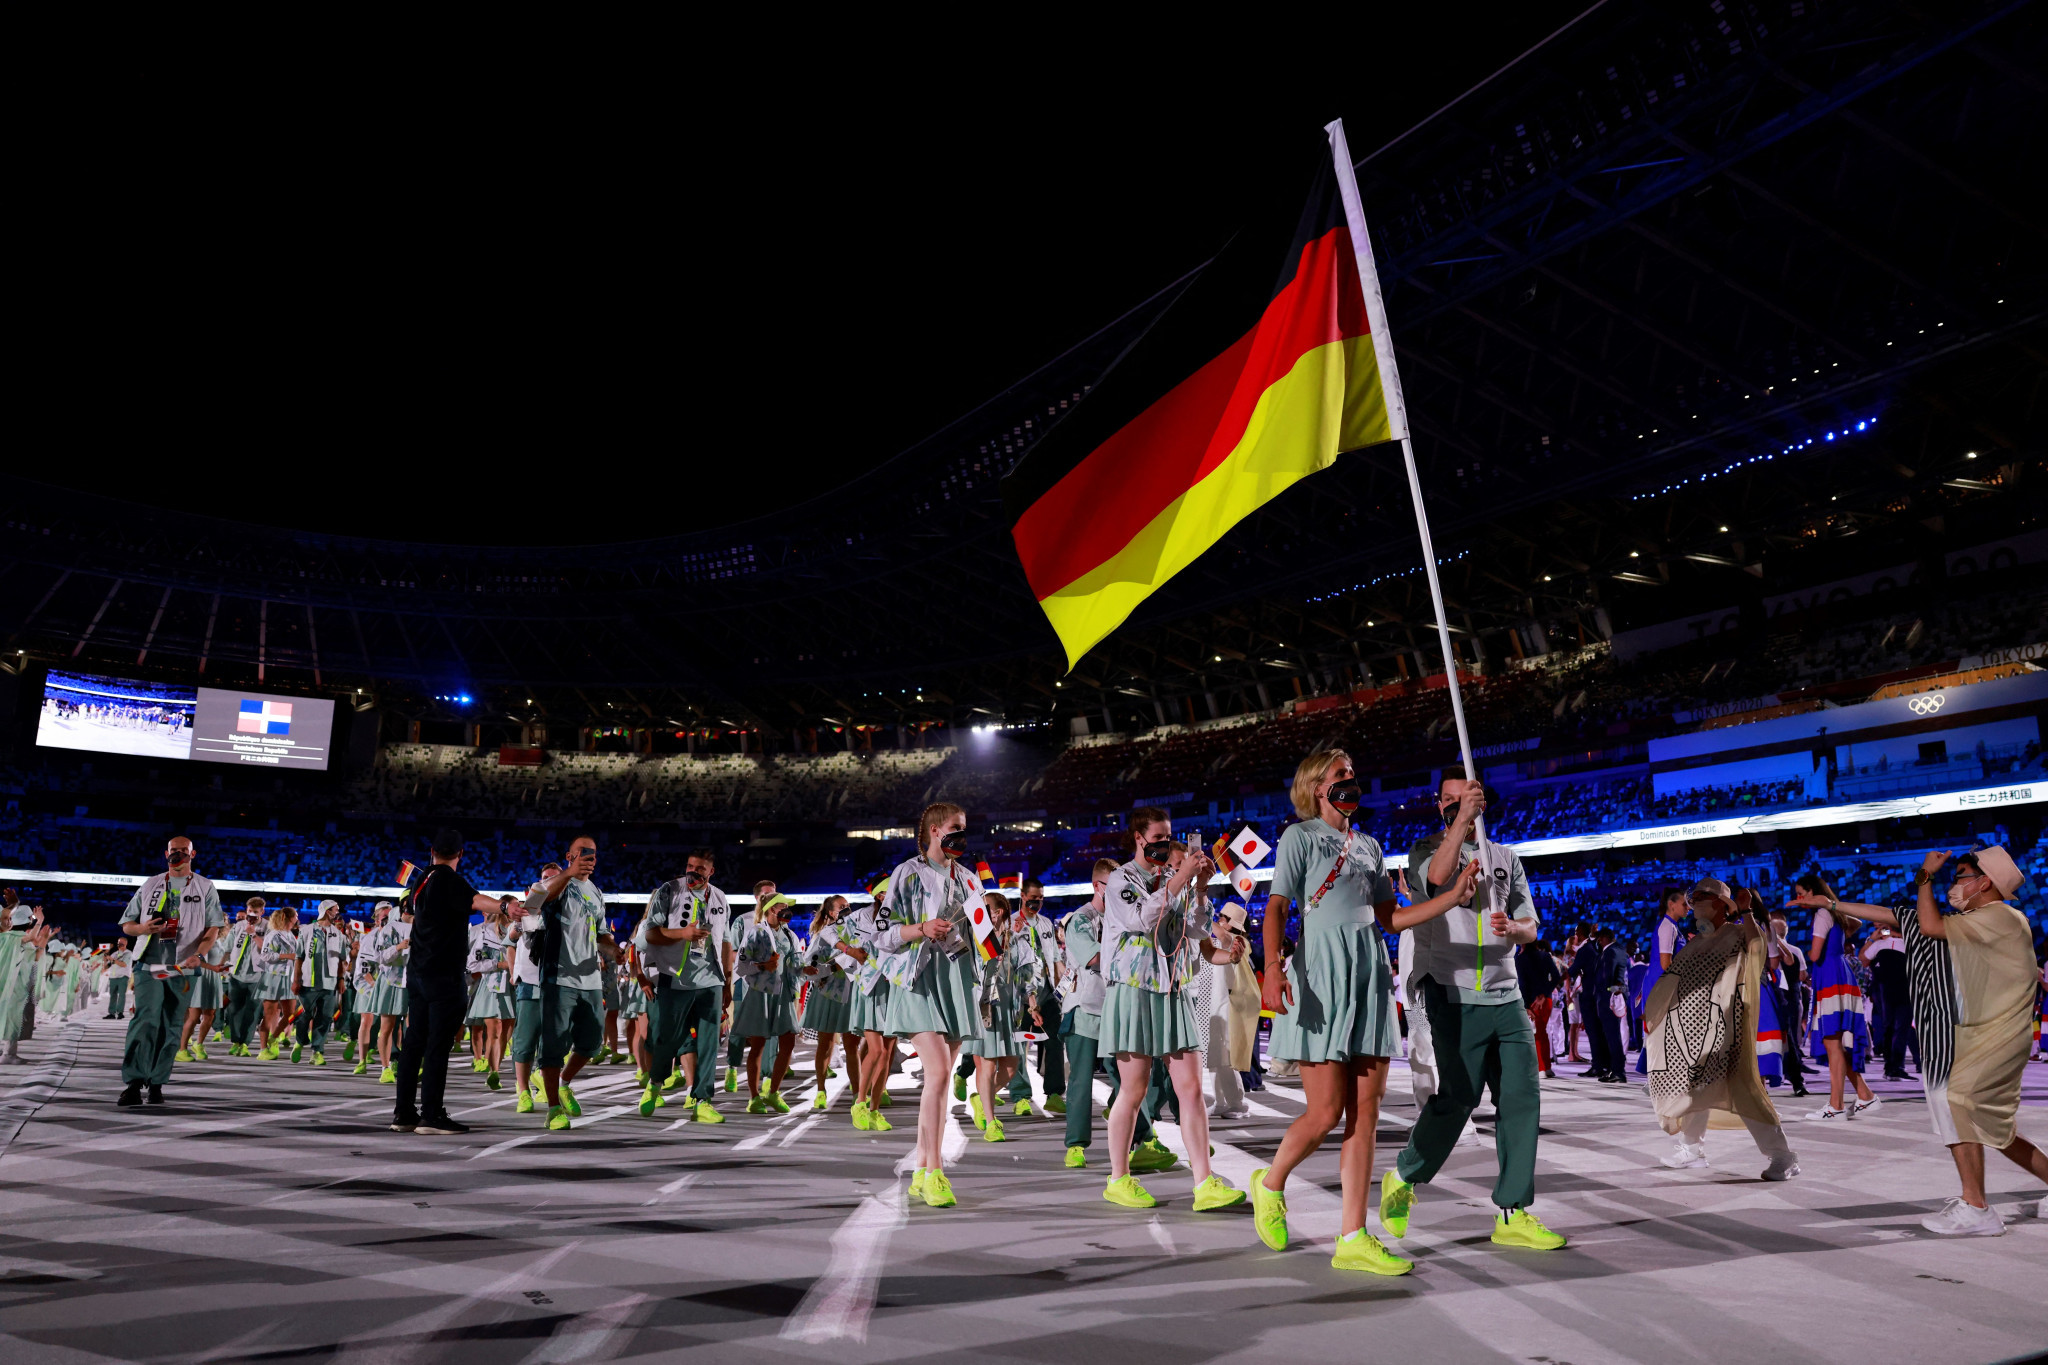 As at Tokyo 2020 ,Germany will have joint flag bearers for the Opening Ceremony at Beijing 2022 ©Getty Images